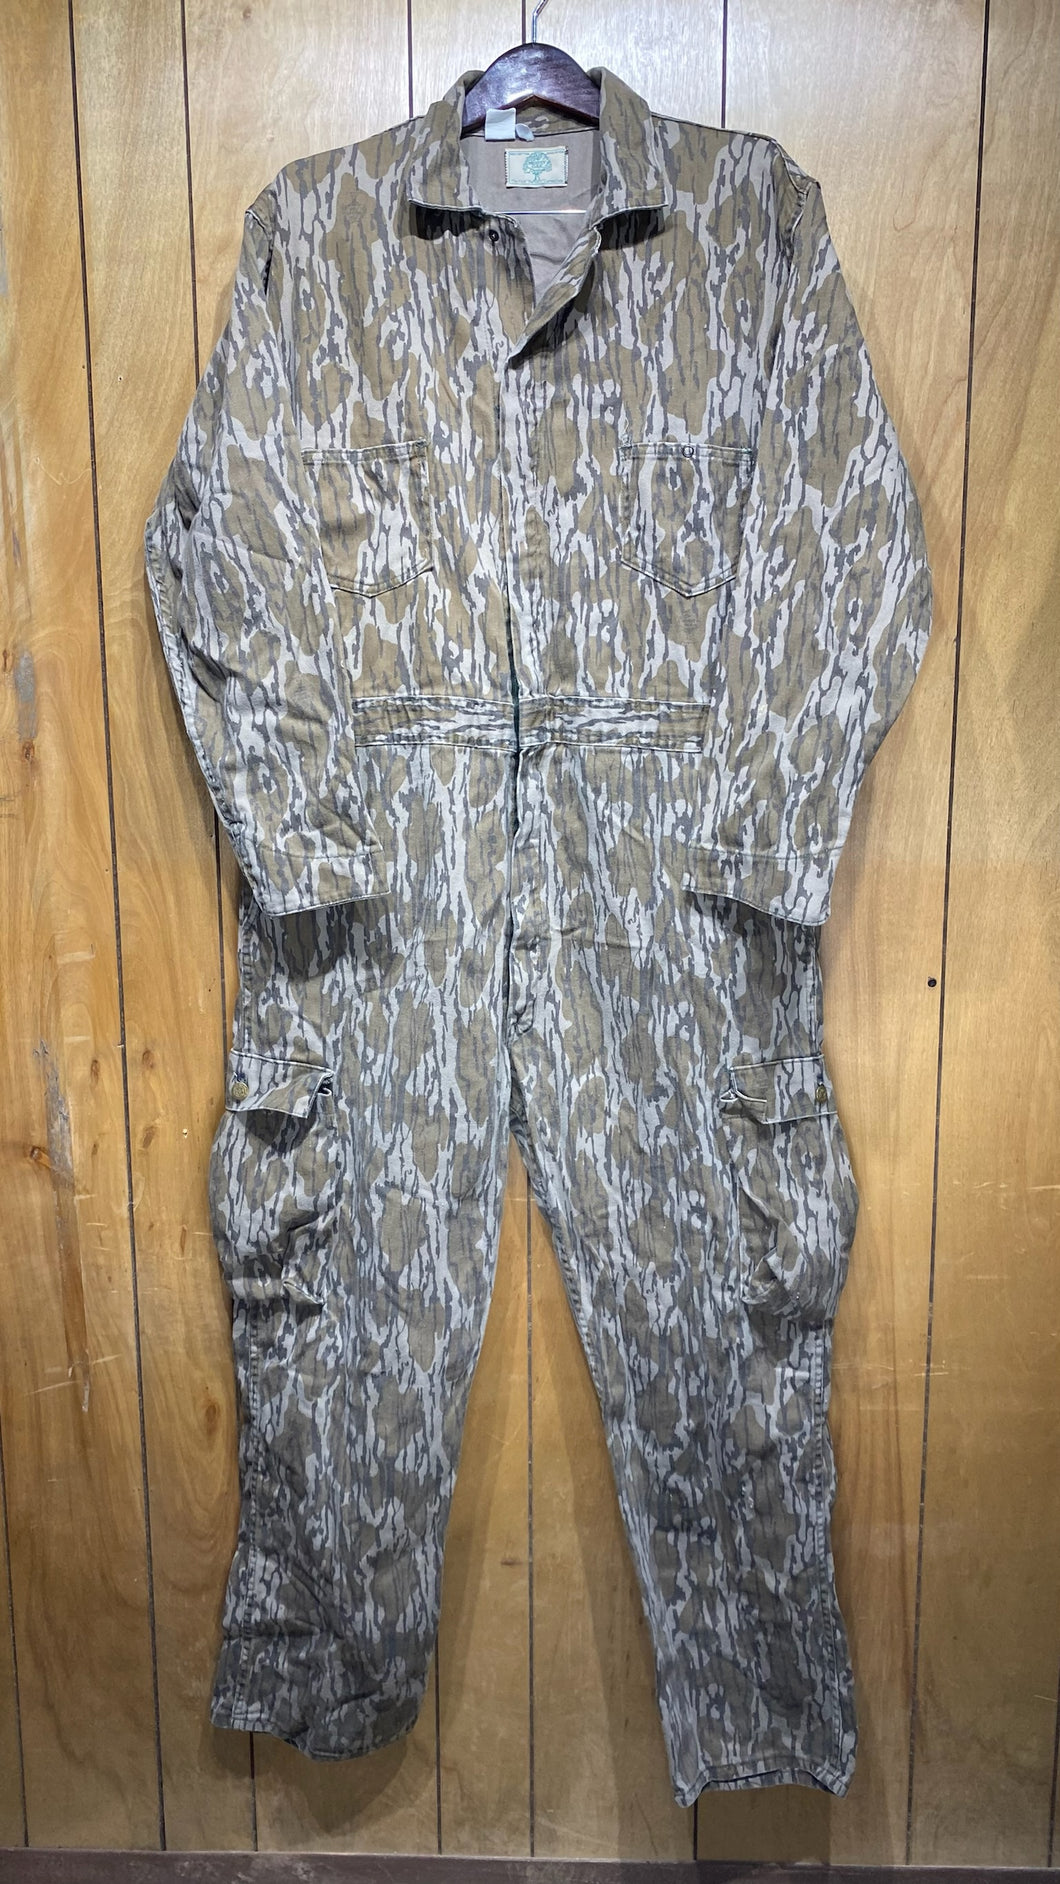 Mossy Oak Hill Country Coveralls (XL/XXL)🇺🇸